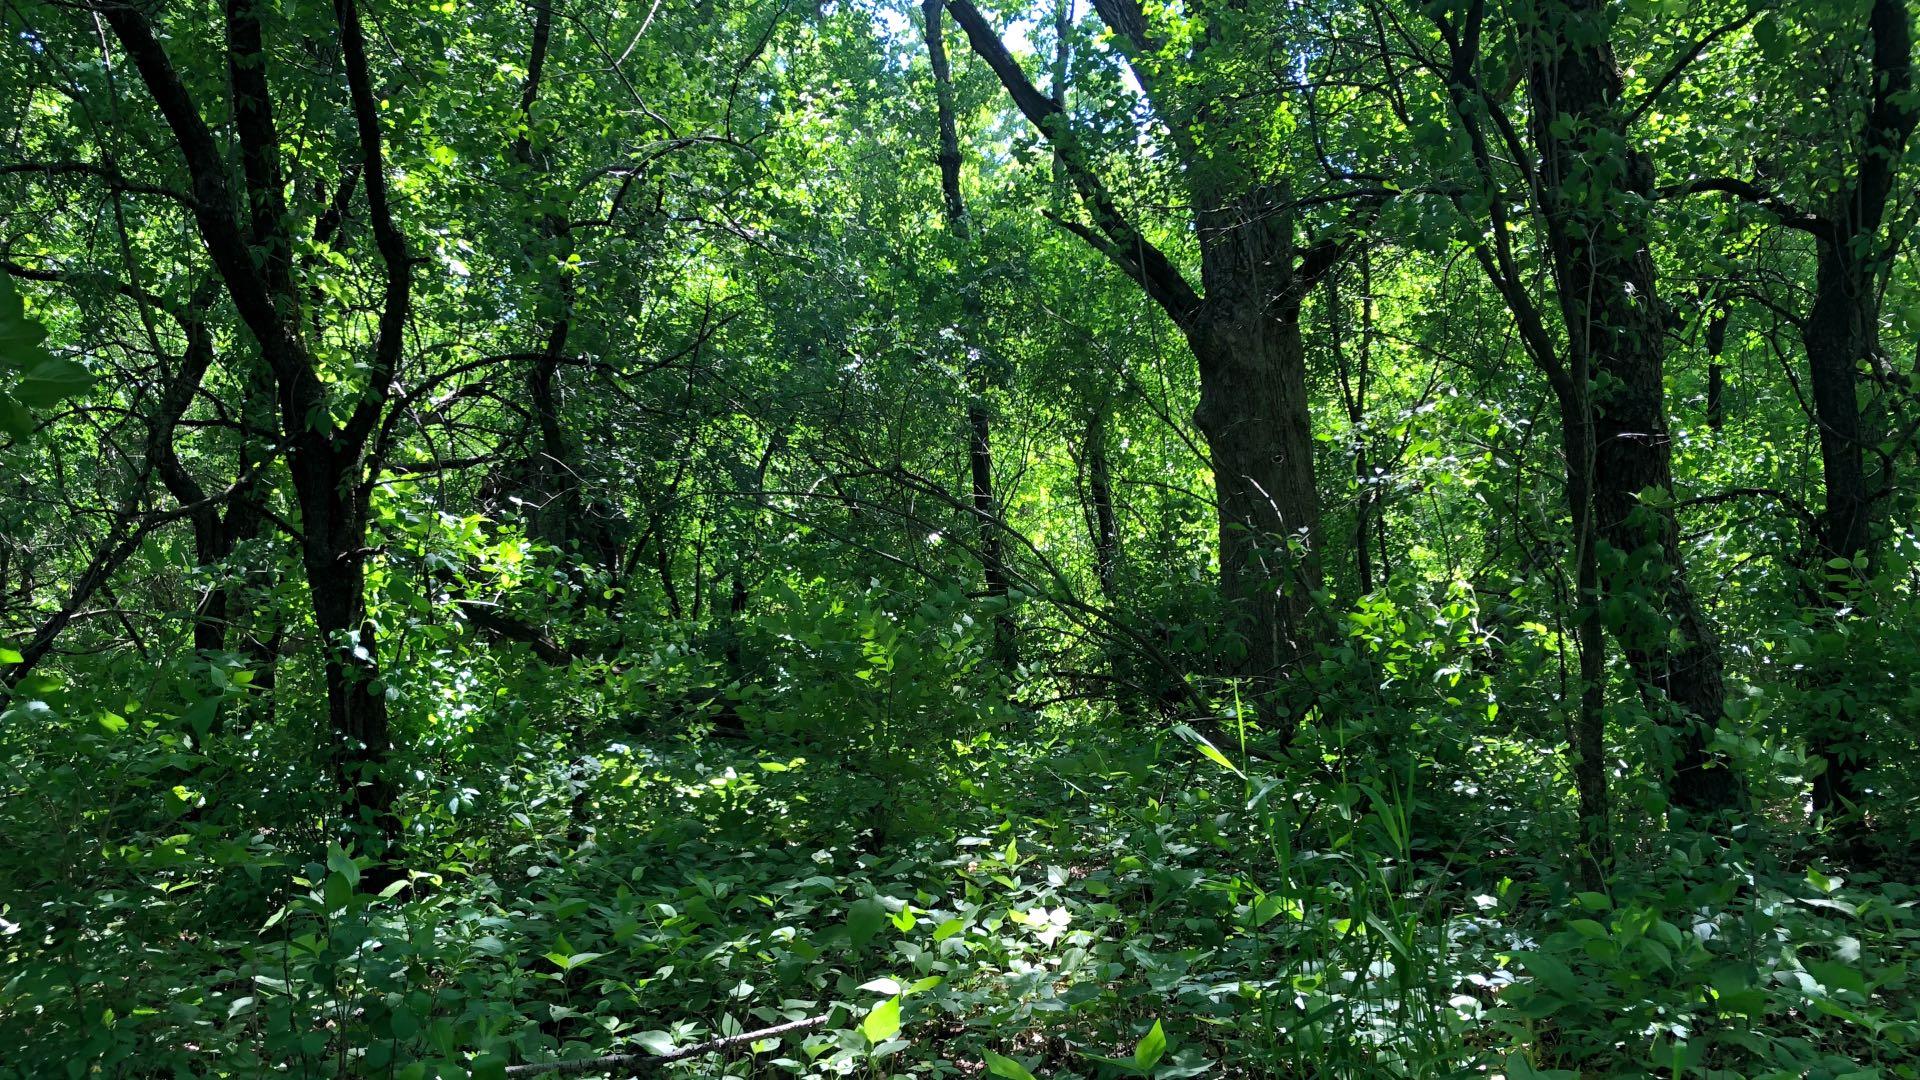 Thompson Road Farm: The woods are overgrown with invasive species. (Patty Wetli / WTTW News)